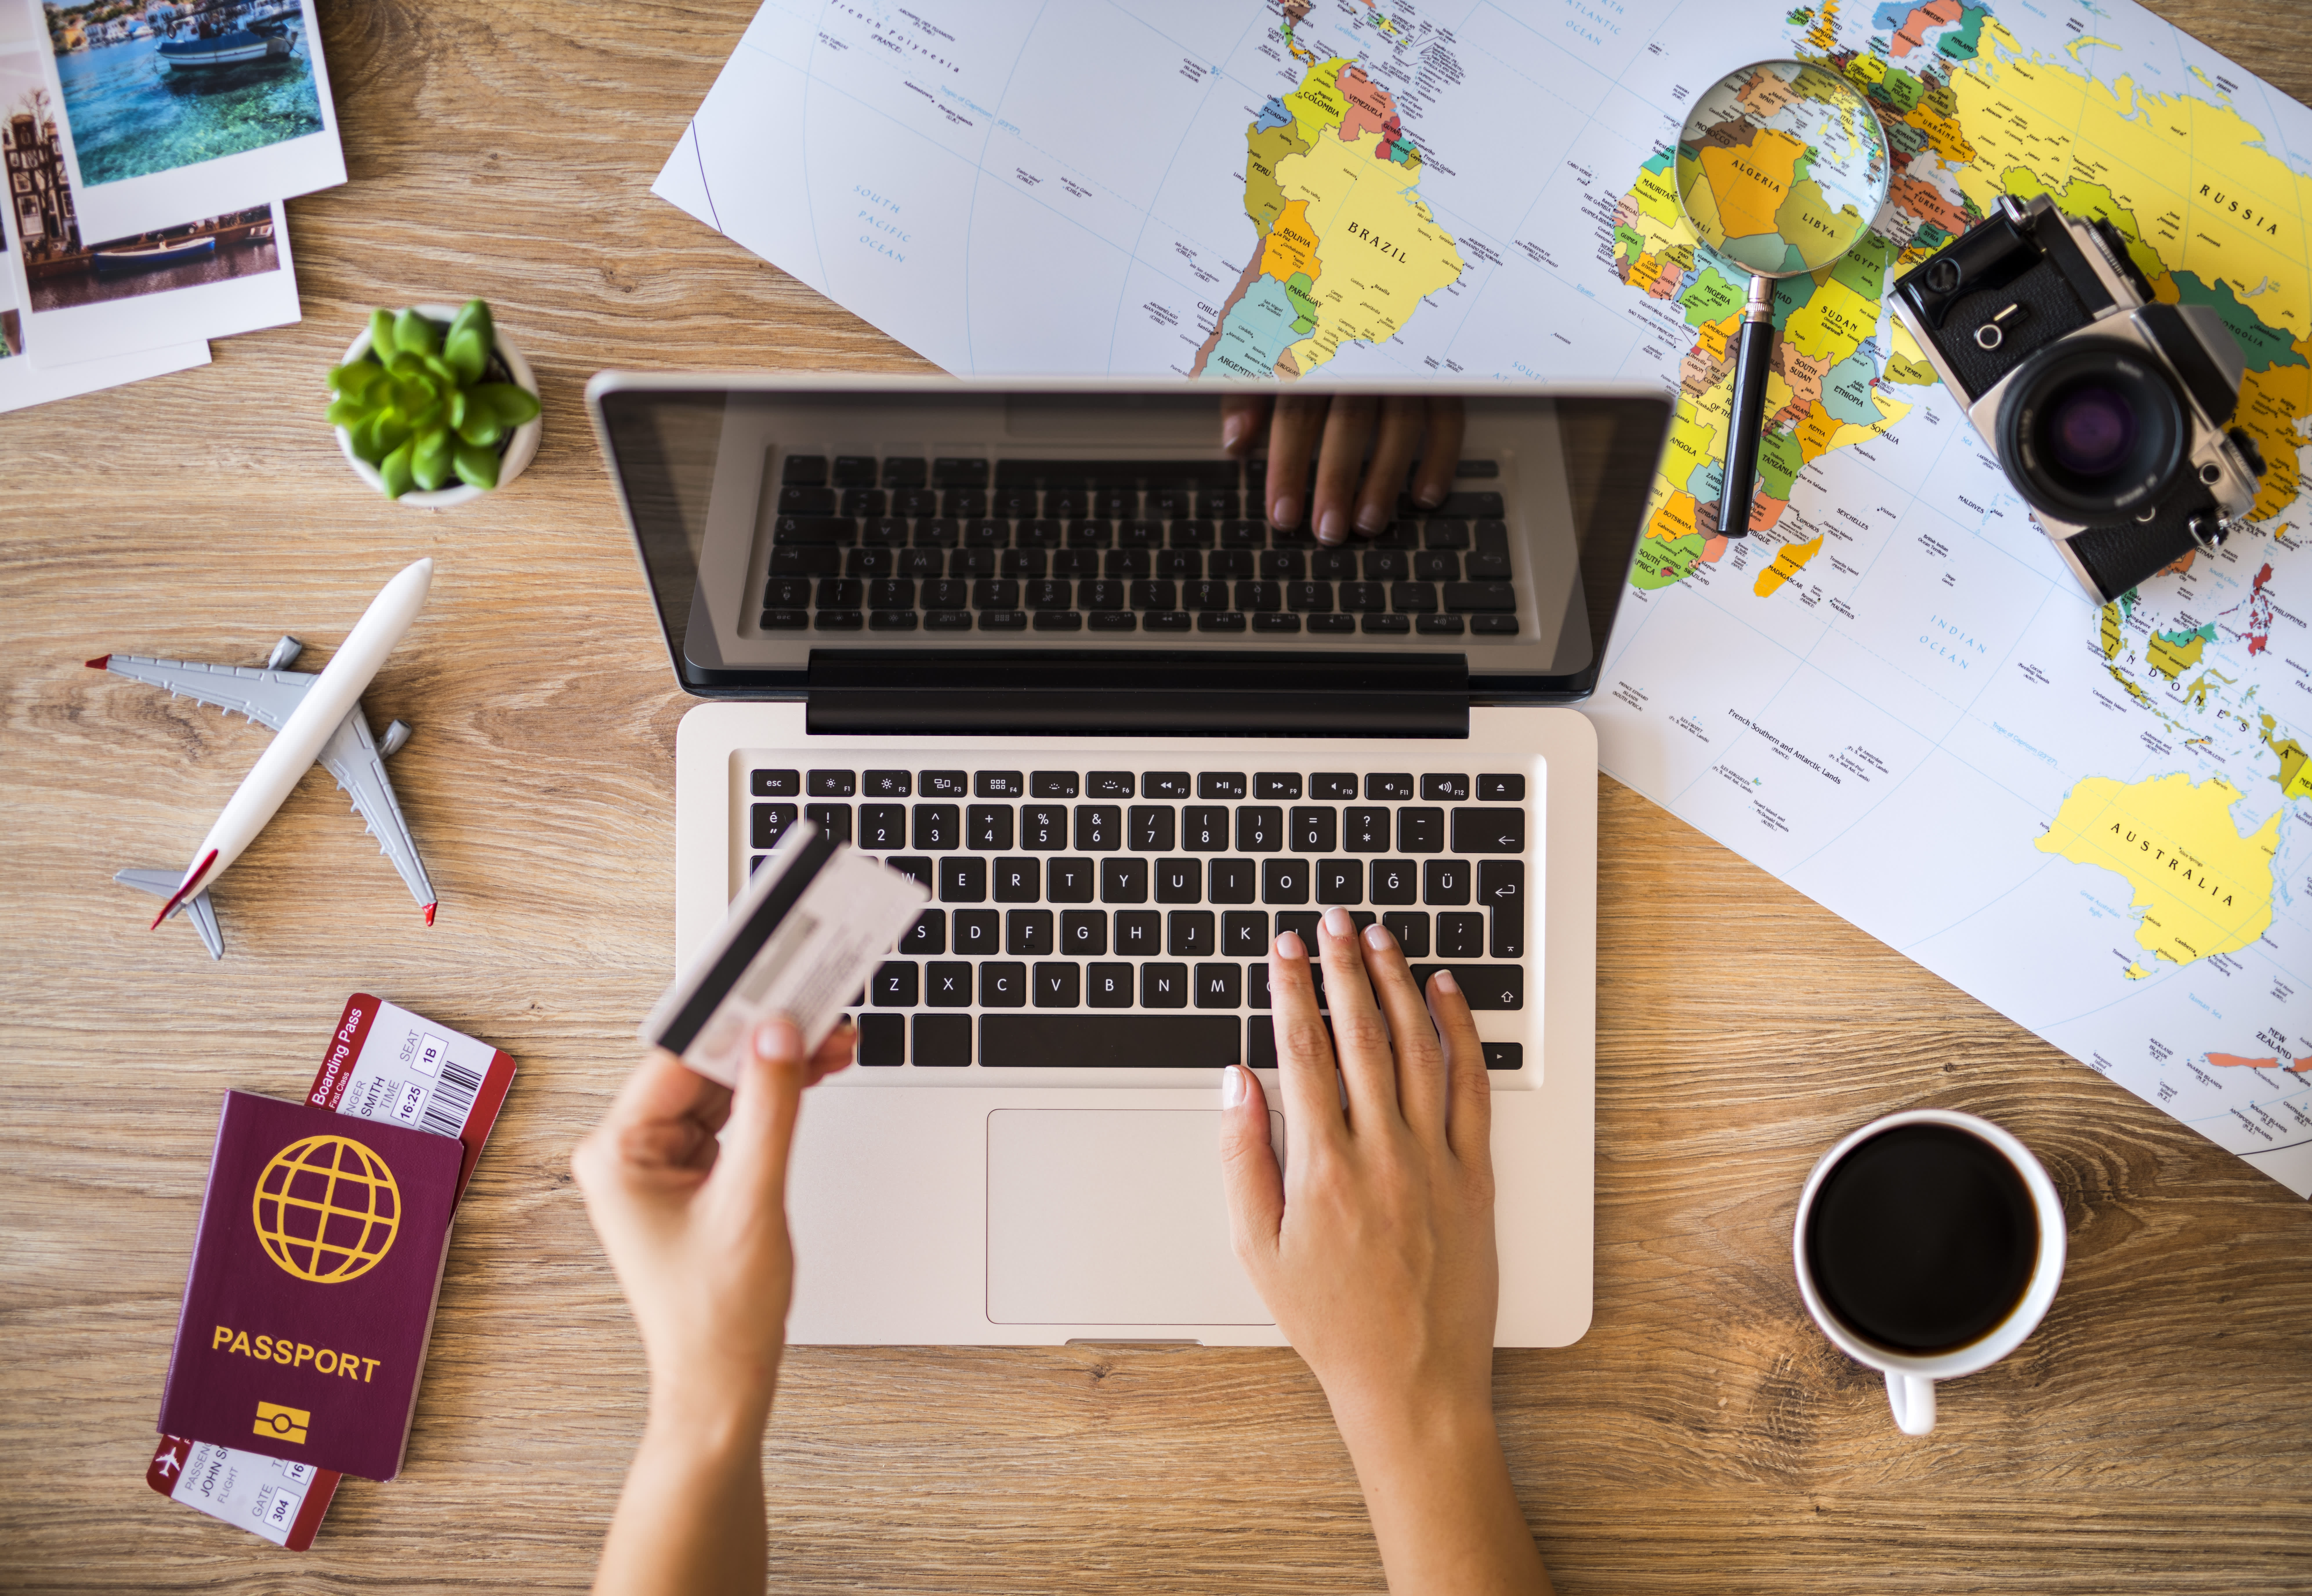 Best Travel Credit Cards with No Annual Fee of May 2021